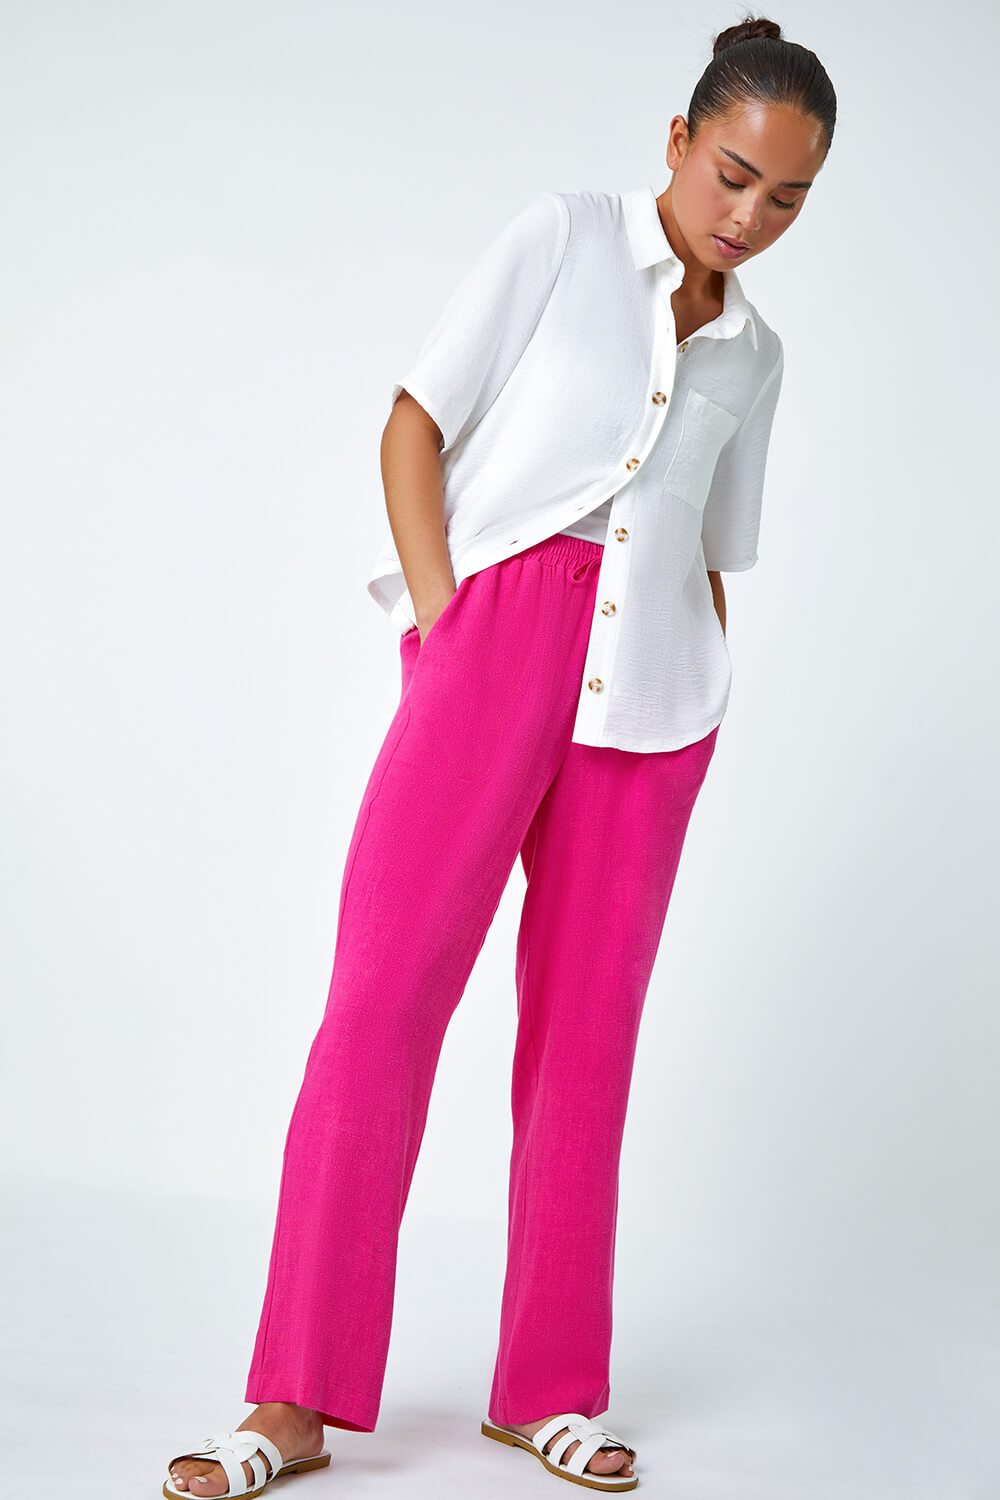 PINK Petite Linen Mix Trousers, Image 2 of 5